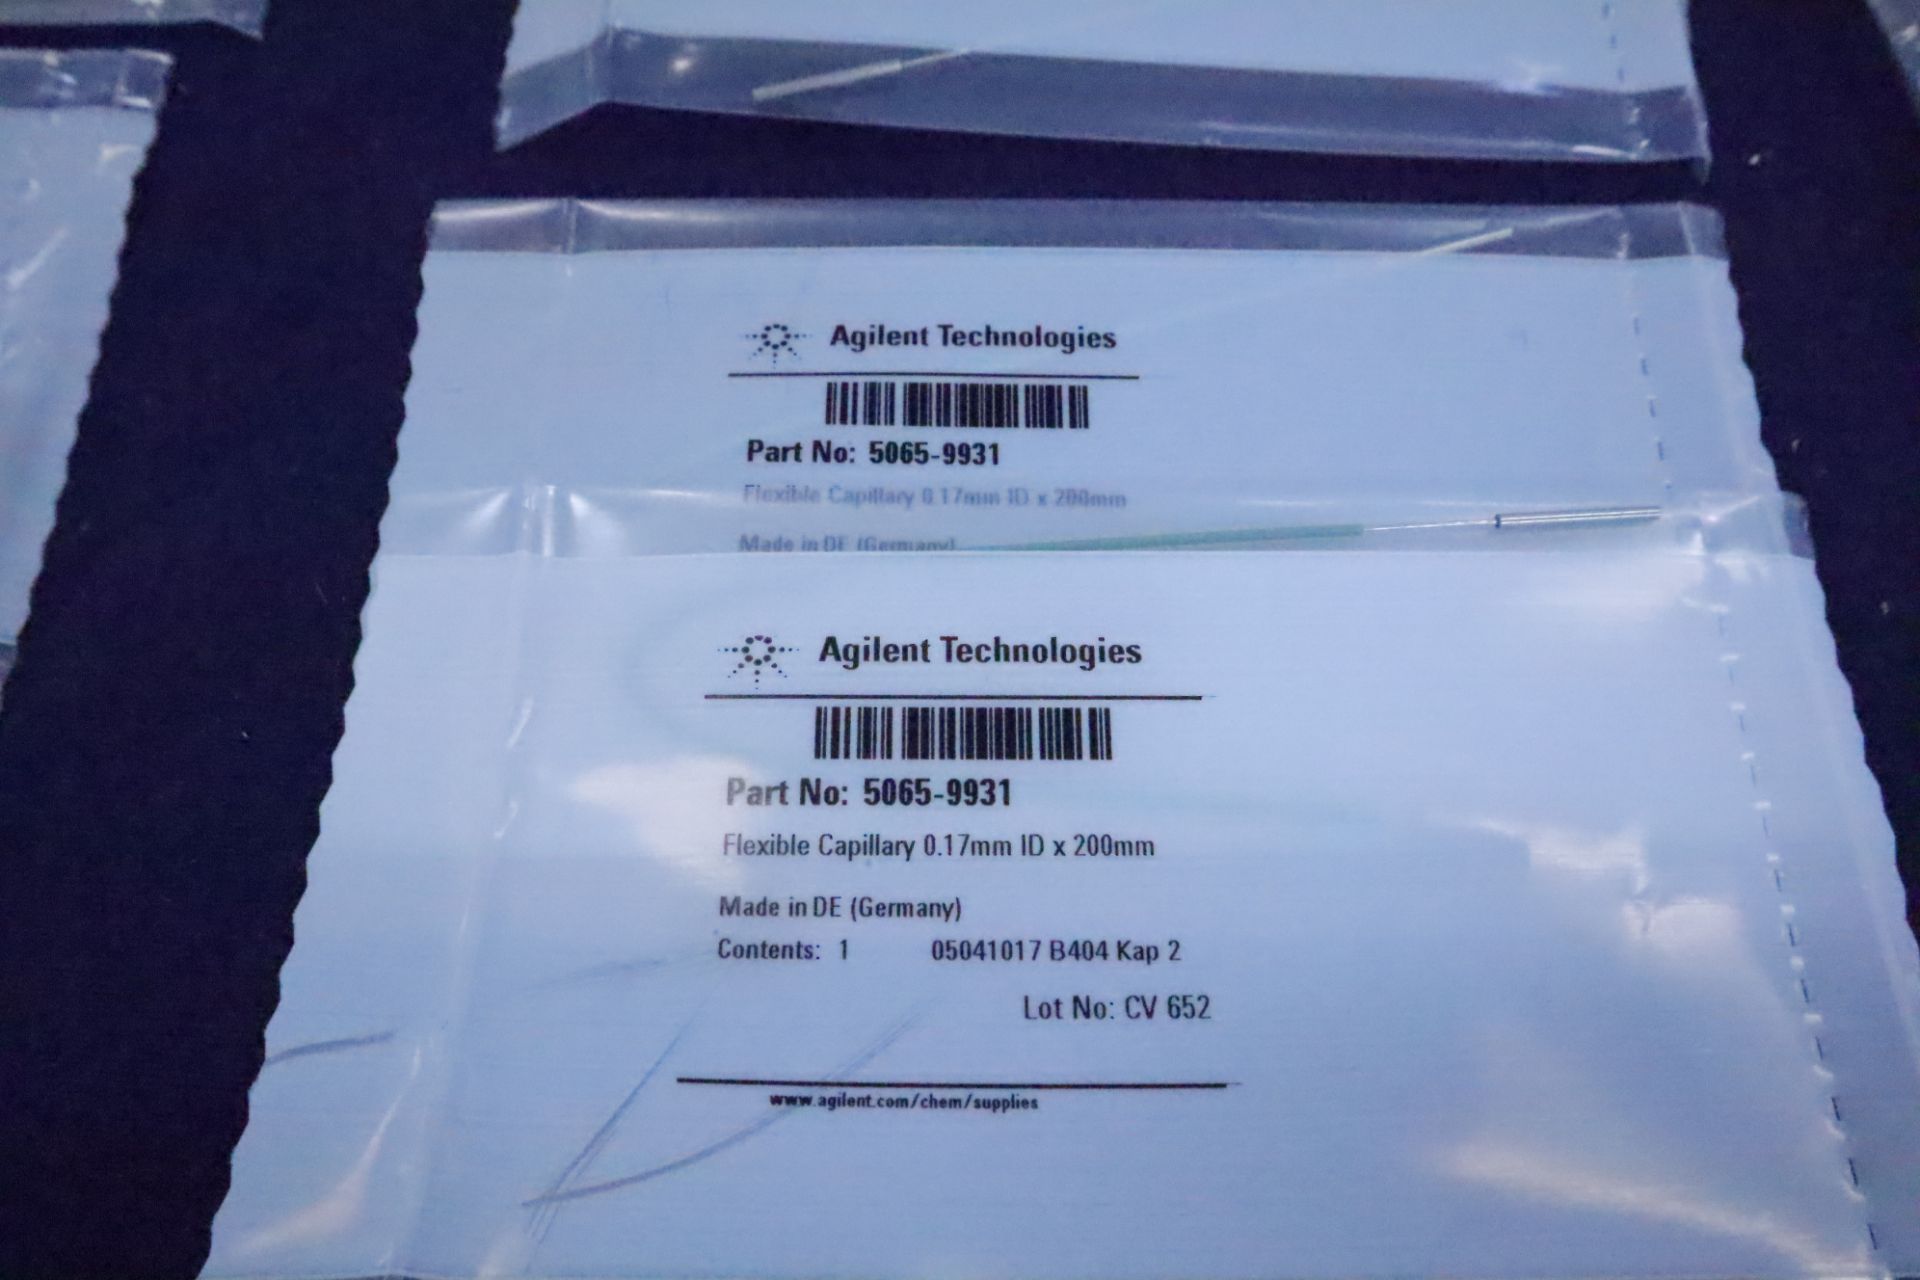 UPDATED PHOTOS Agilent Technologies OEM Replacement Parts and tool kits for LC/MS Machines - Image 26 of 37